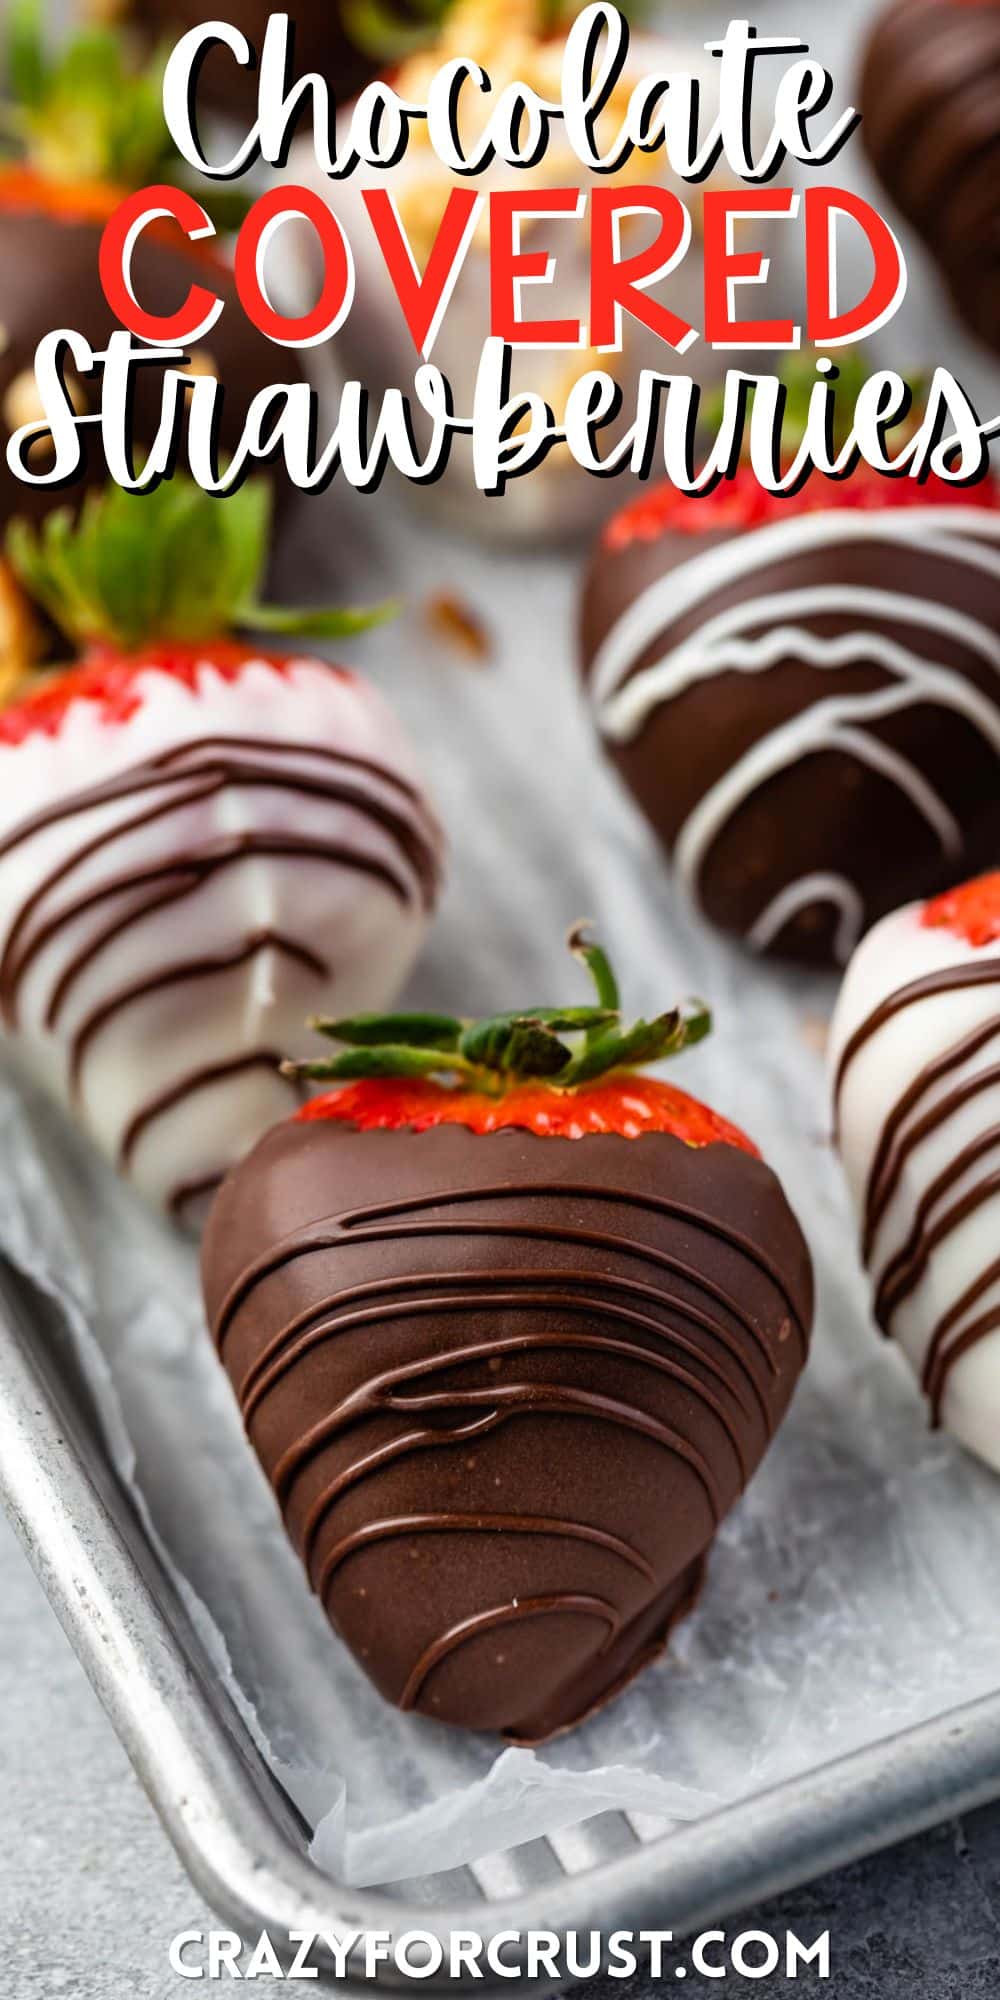 brown and white chocolate covered strawberries on top of a metal sheet pan with words on the image.